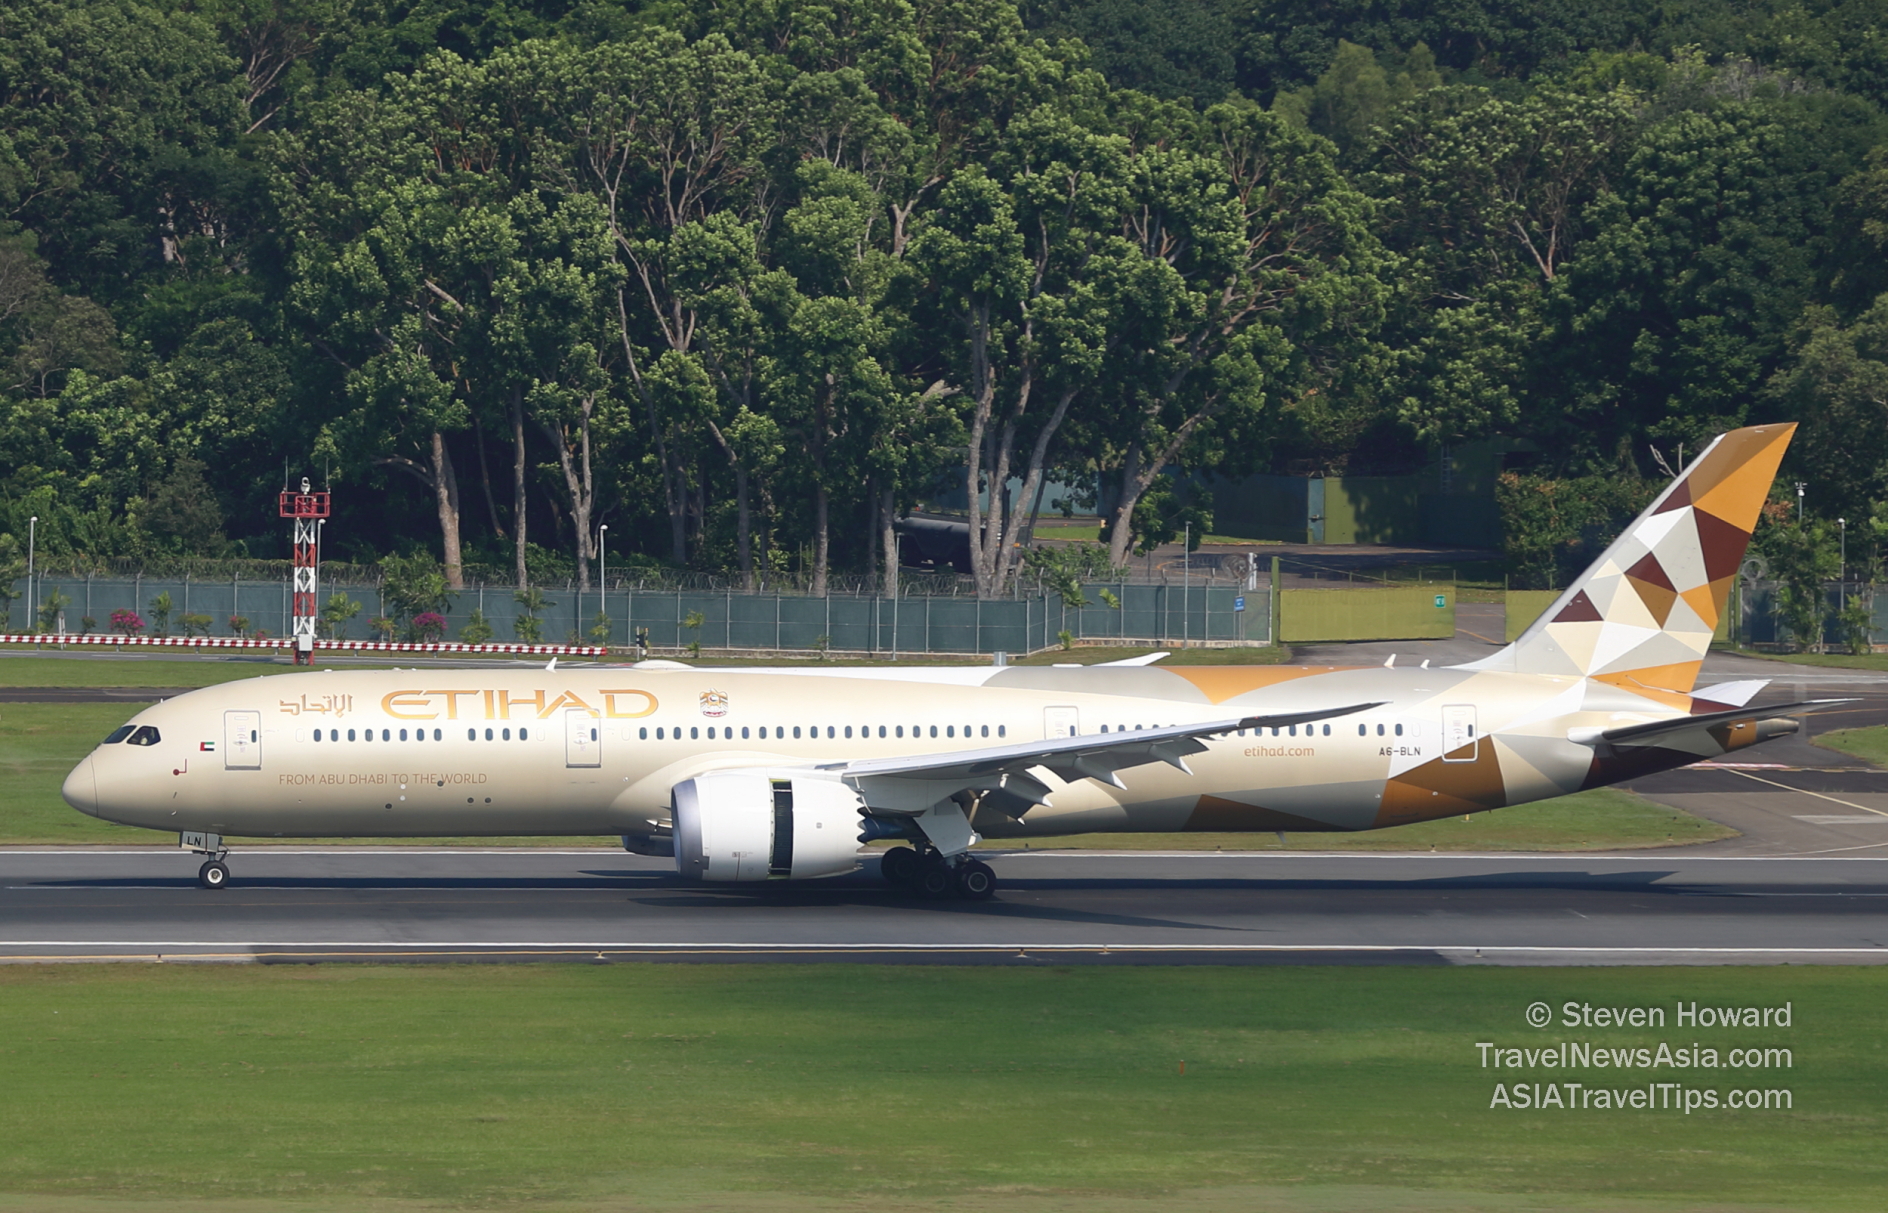 Etihad Airways B787-9 reg: A6-BLN. Picture by Steven Howard of TravelNewsAsia.com Click to enlarge.